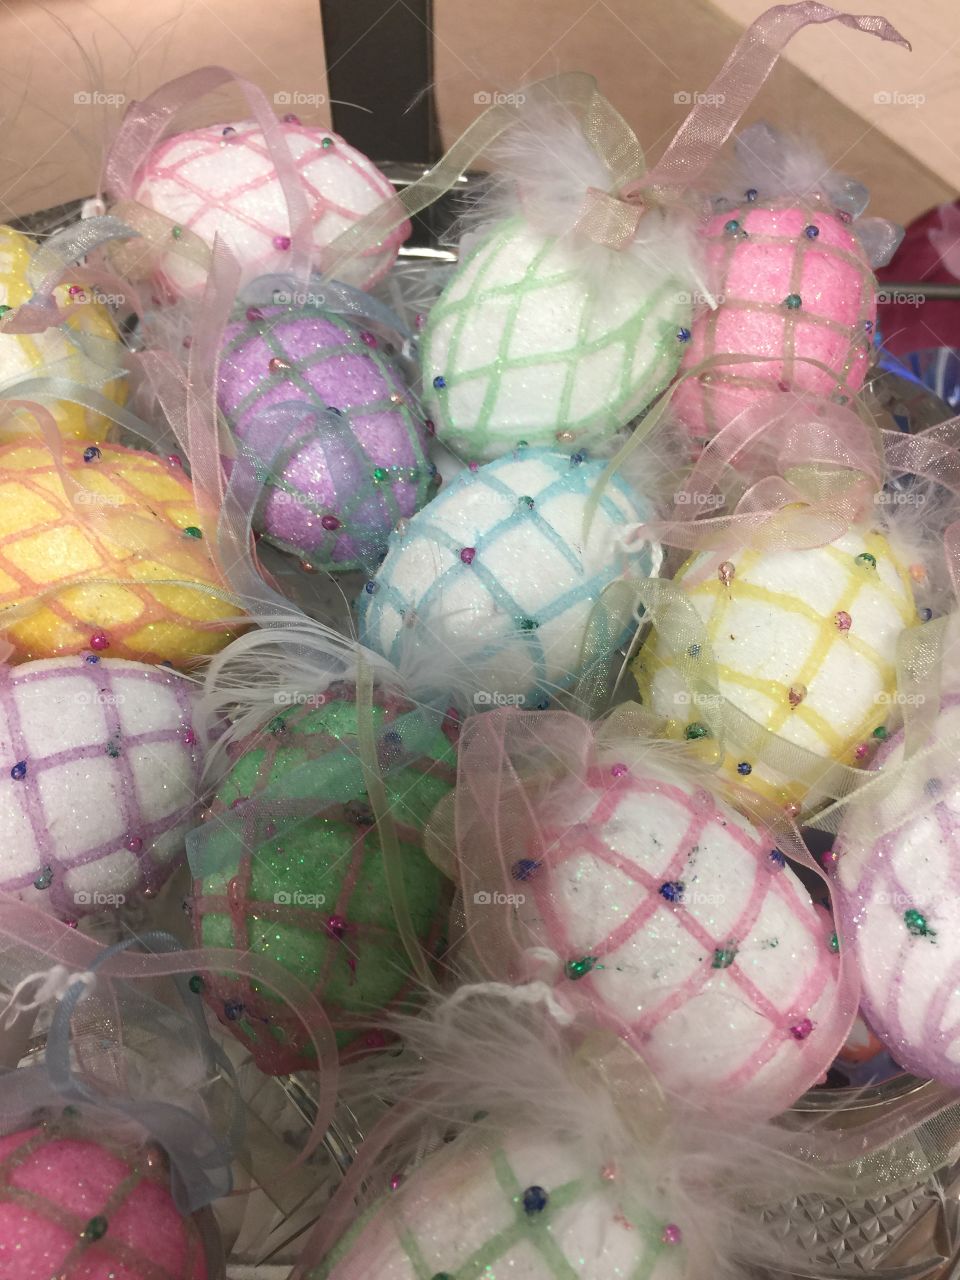 Wrapped Easter eggs